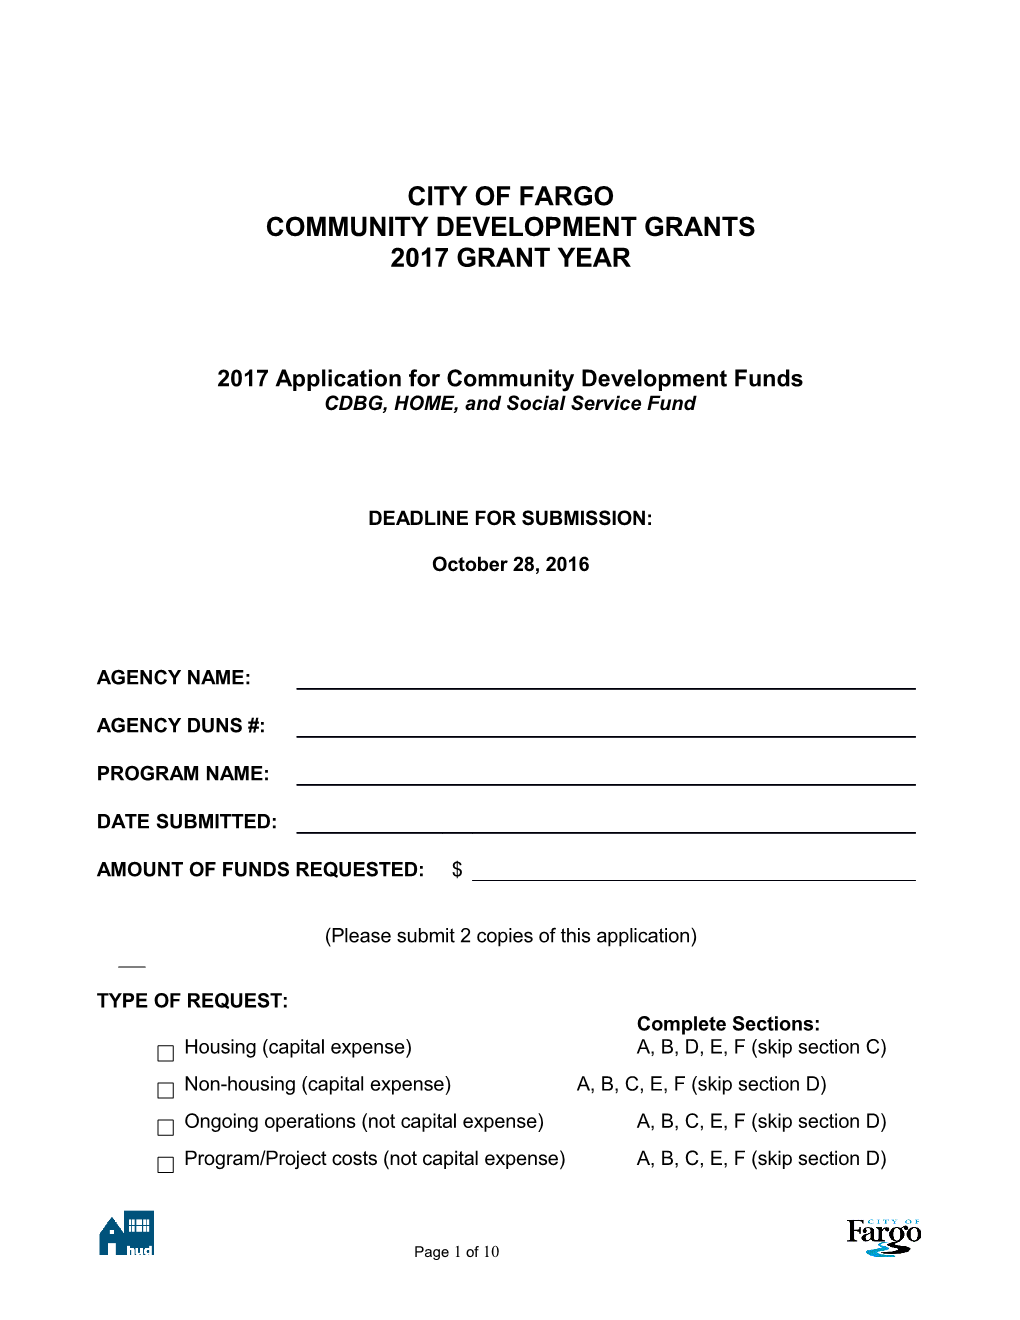 2017 Application for Community Development Funds